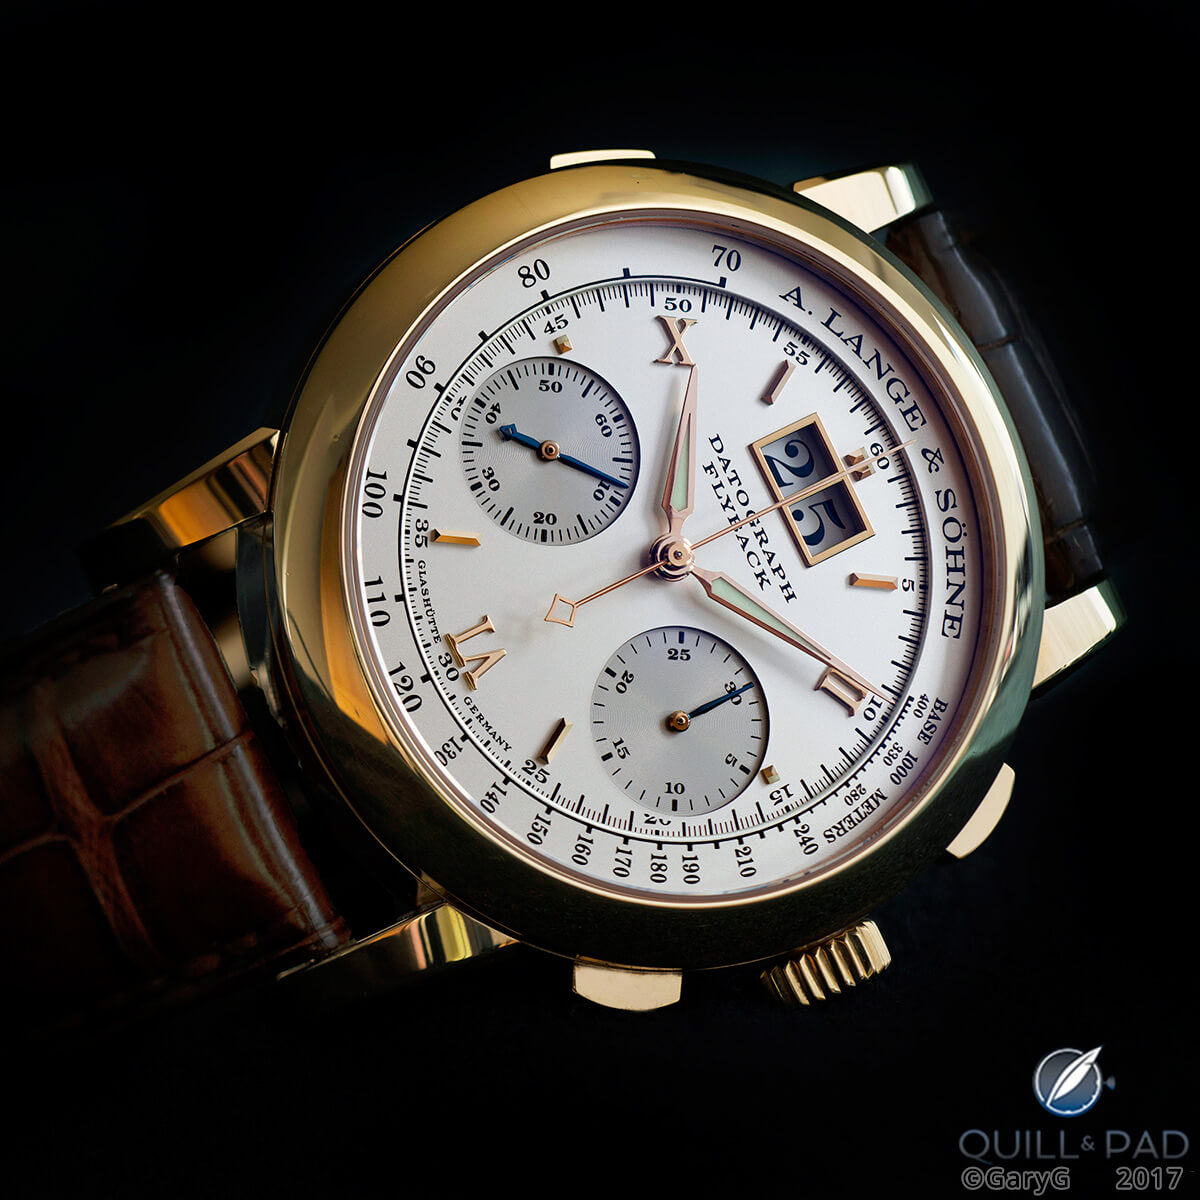 Making another collector happy: the author’s former A. Lange & Söhne Datograph